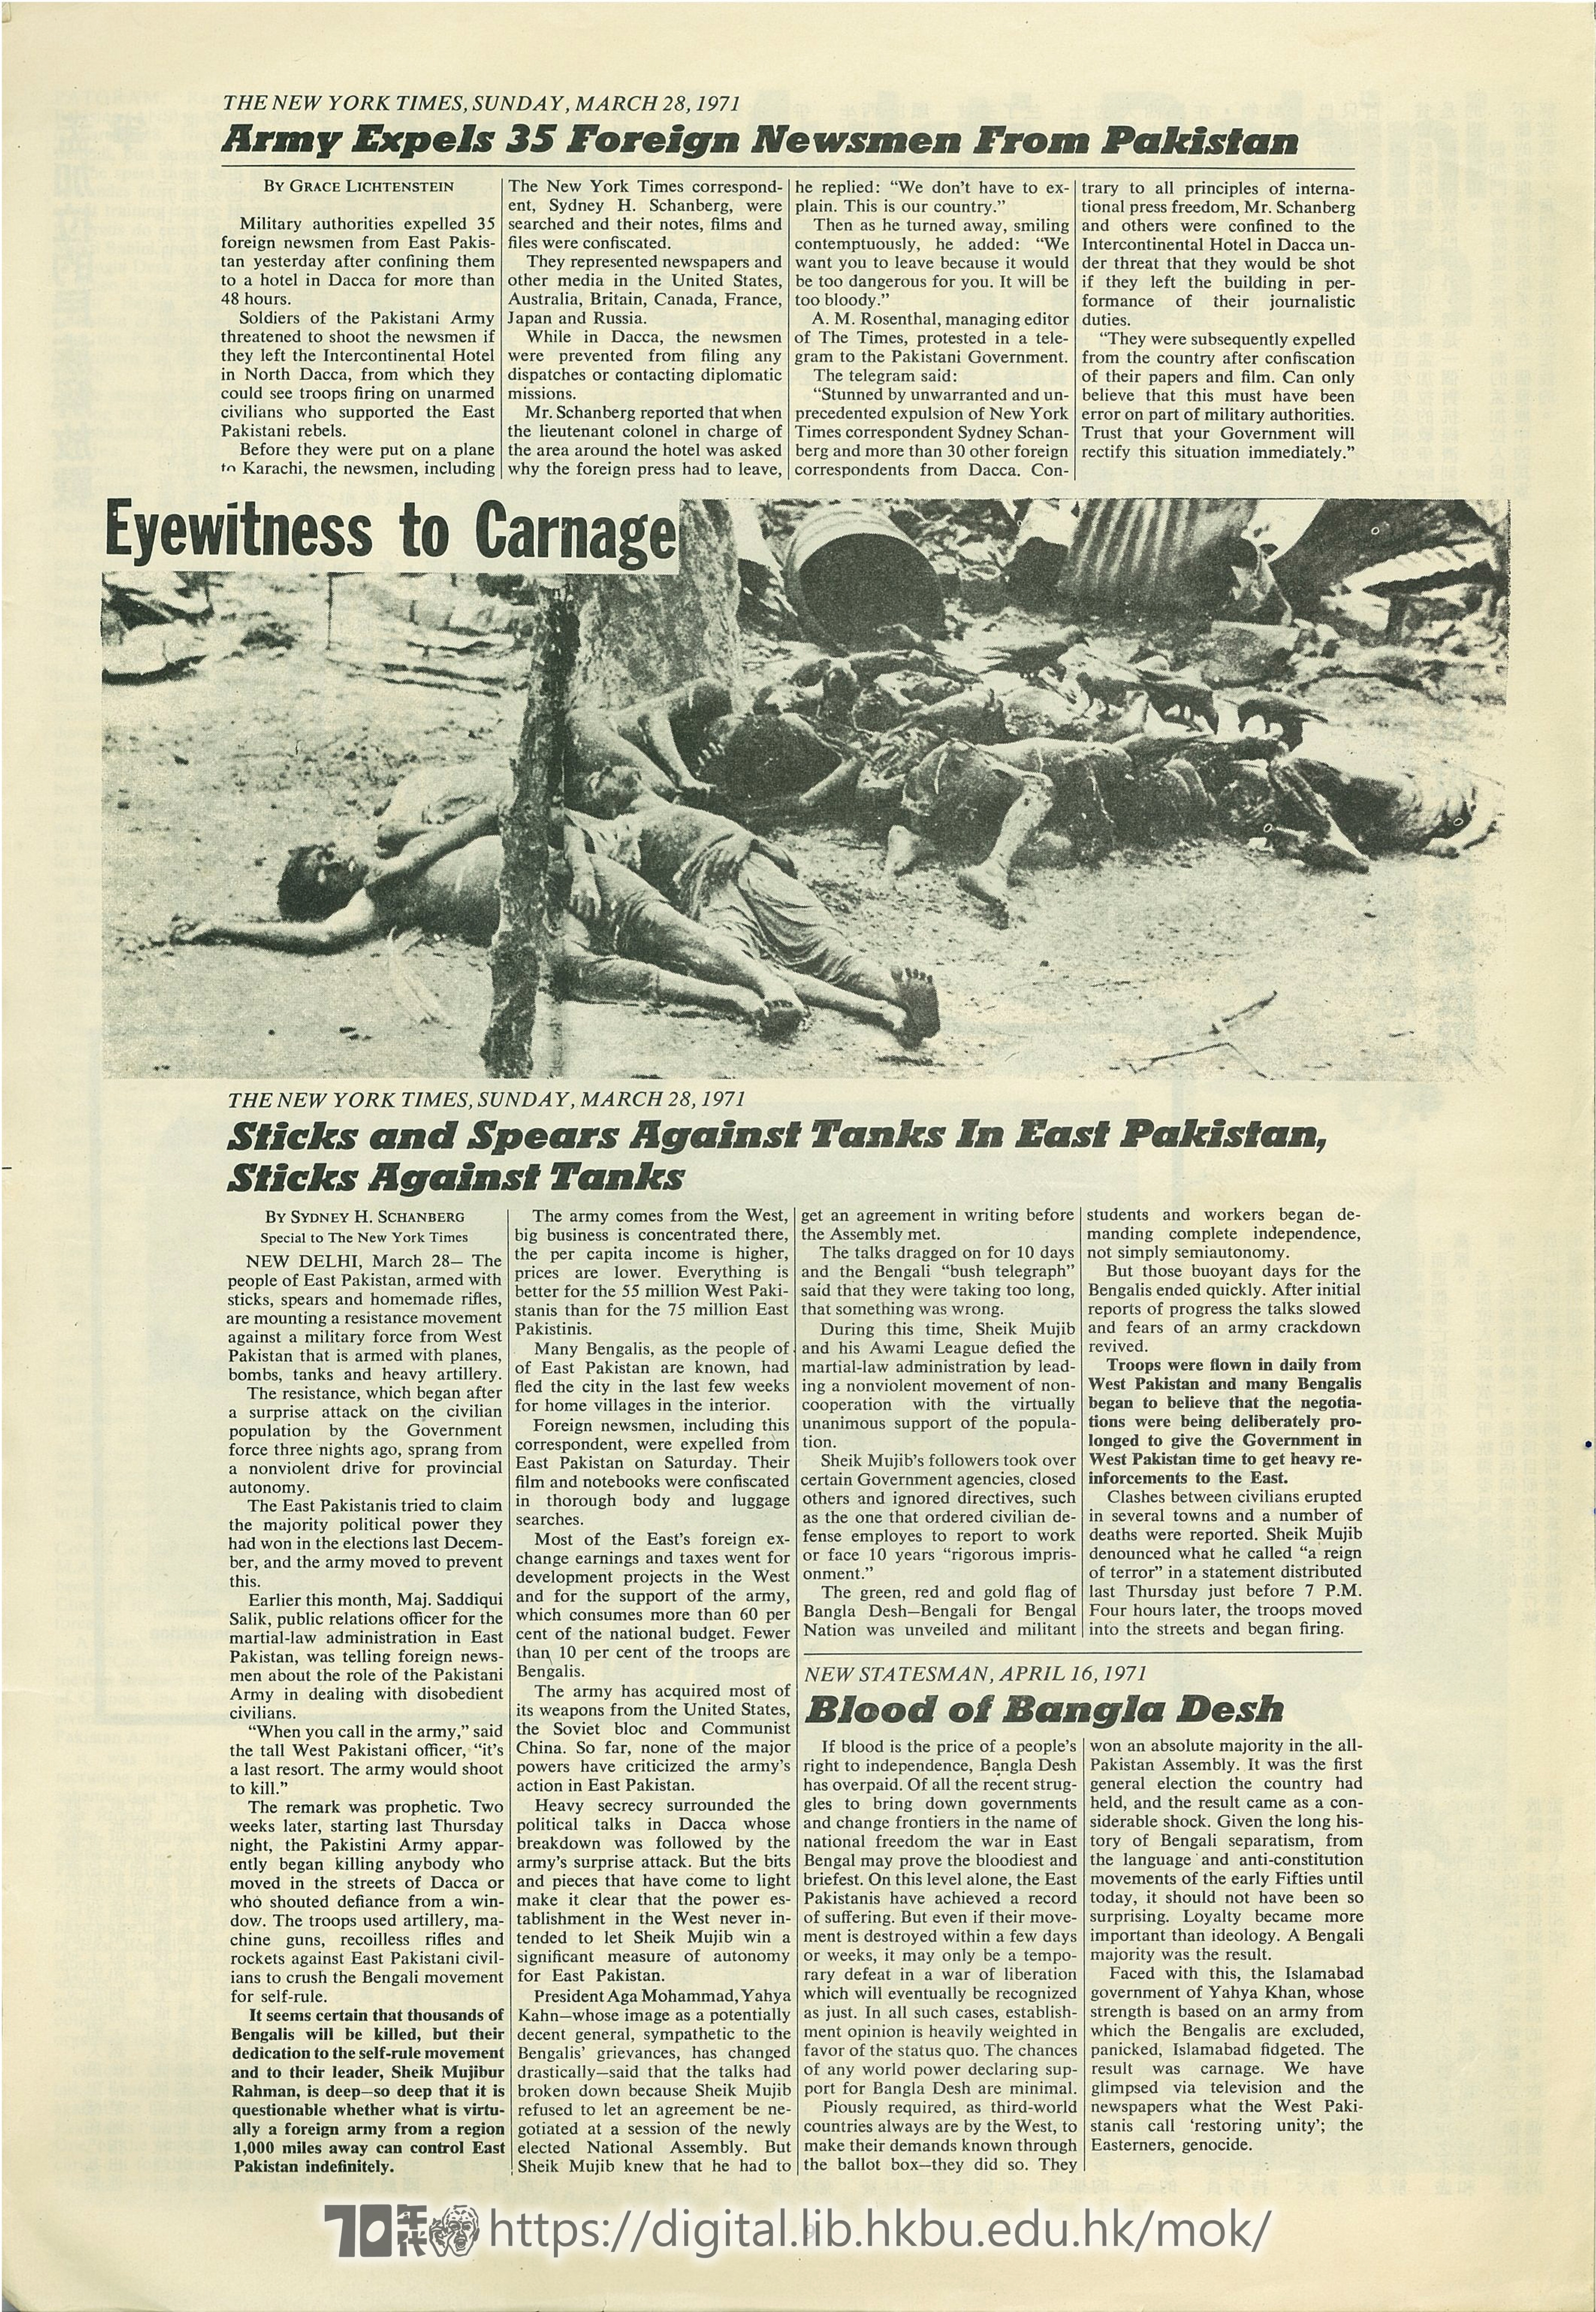  Special Issue 軍隊驅逐35名外國記者 The New York Times, Sunday, March 28, 1971 